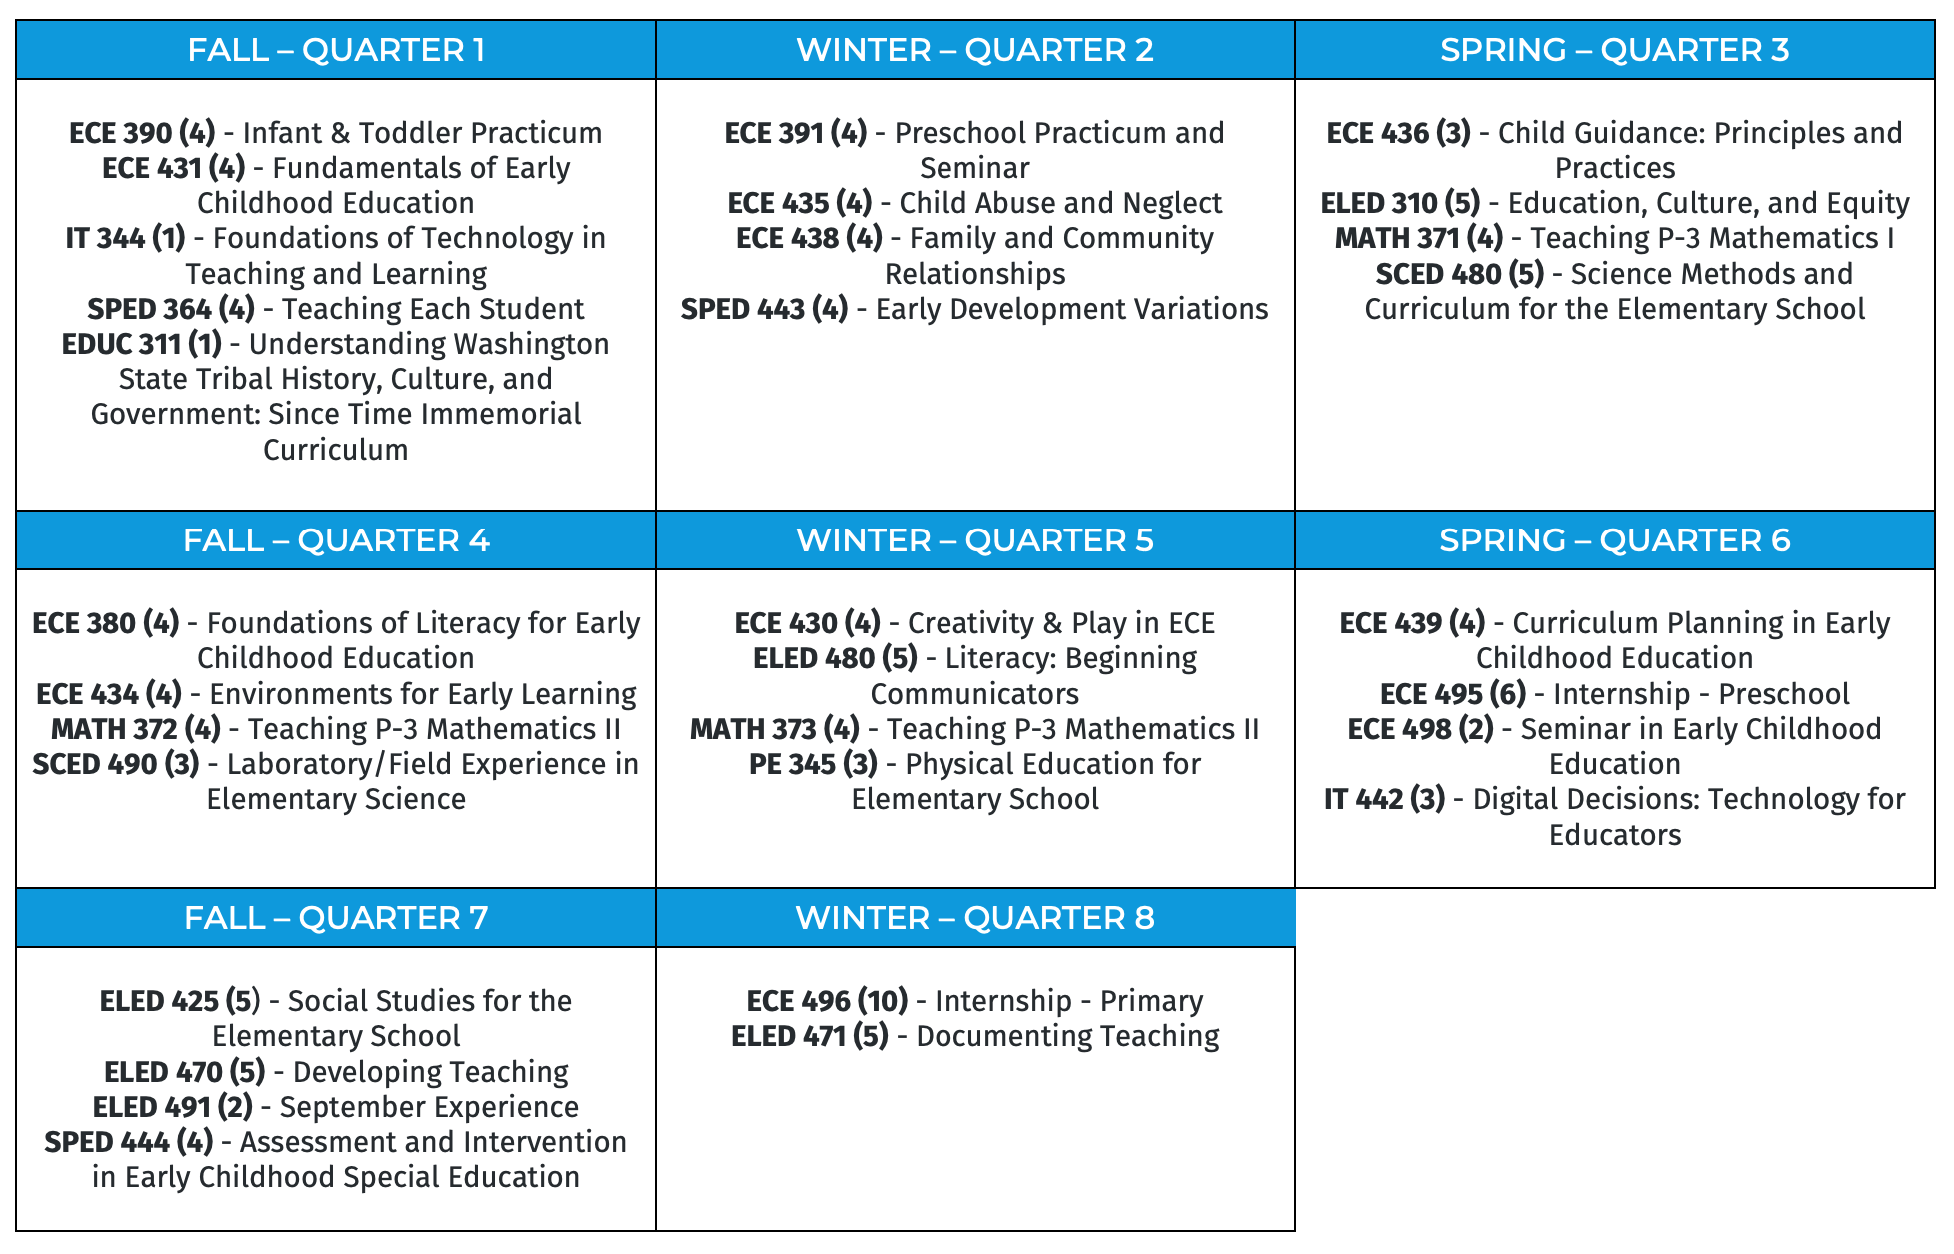 Schedule of Courses by Quarter